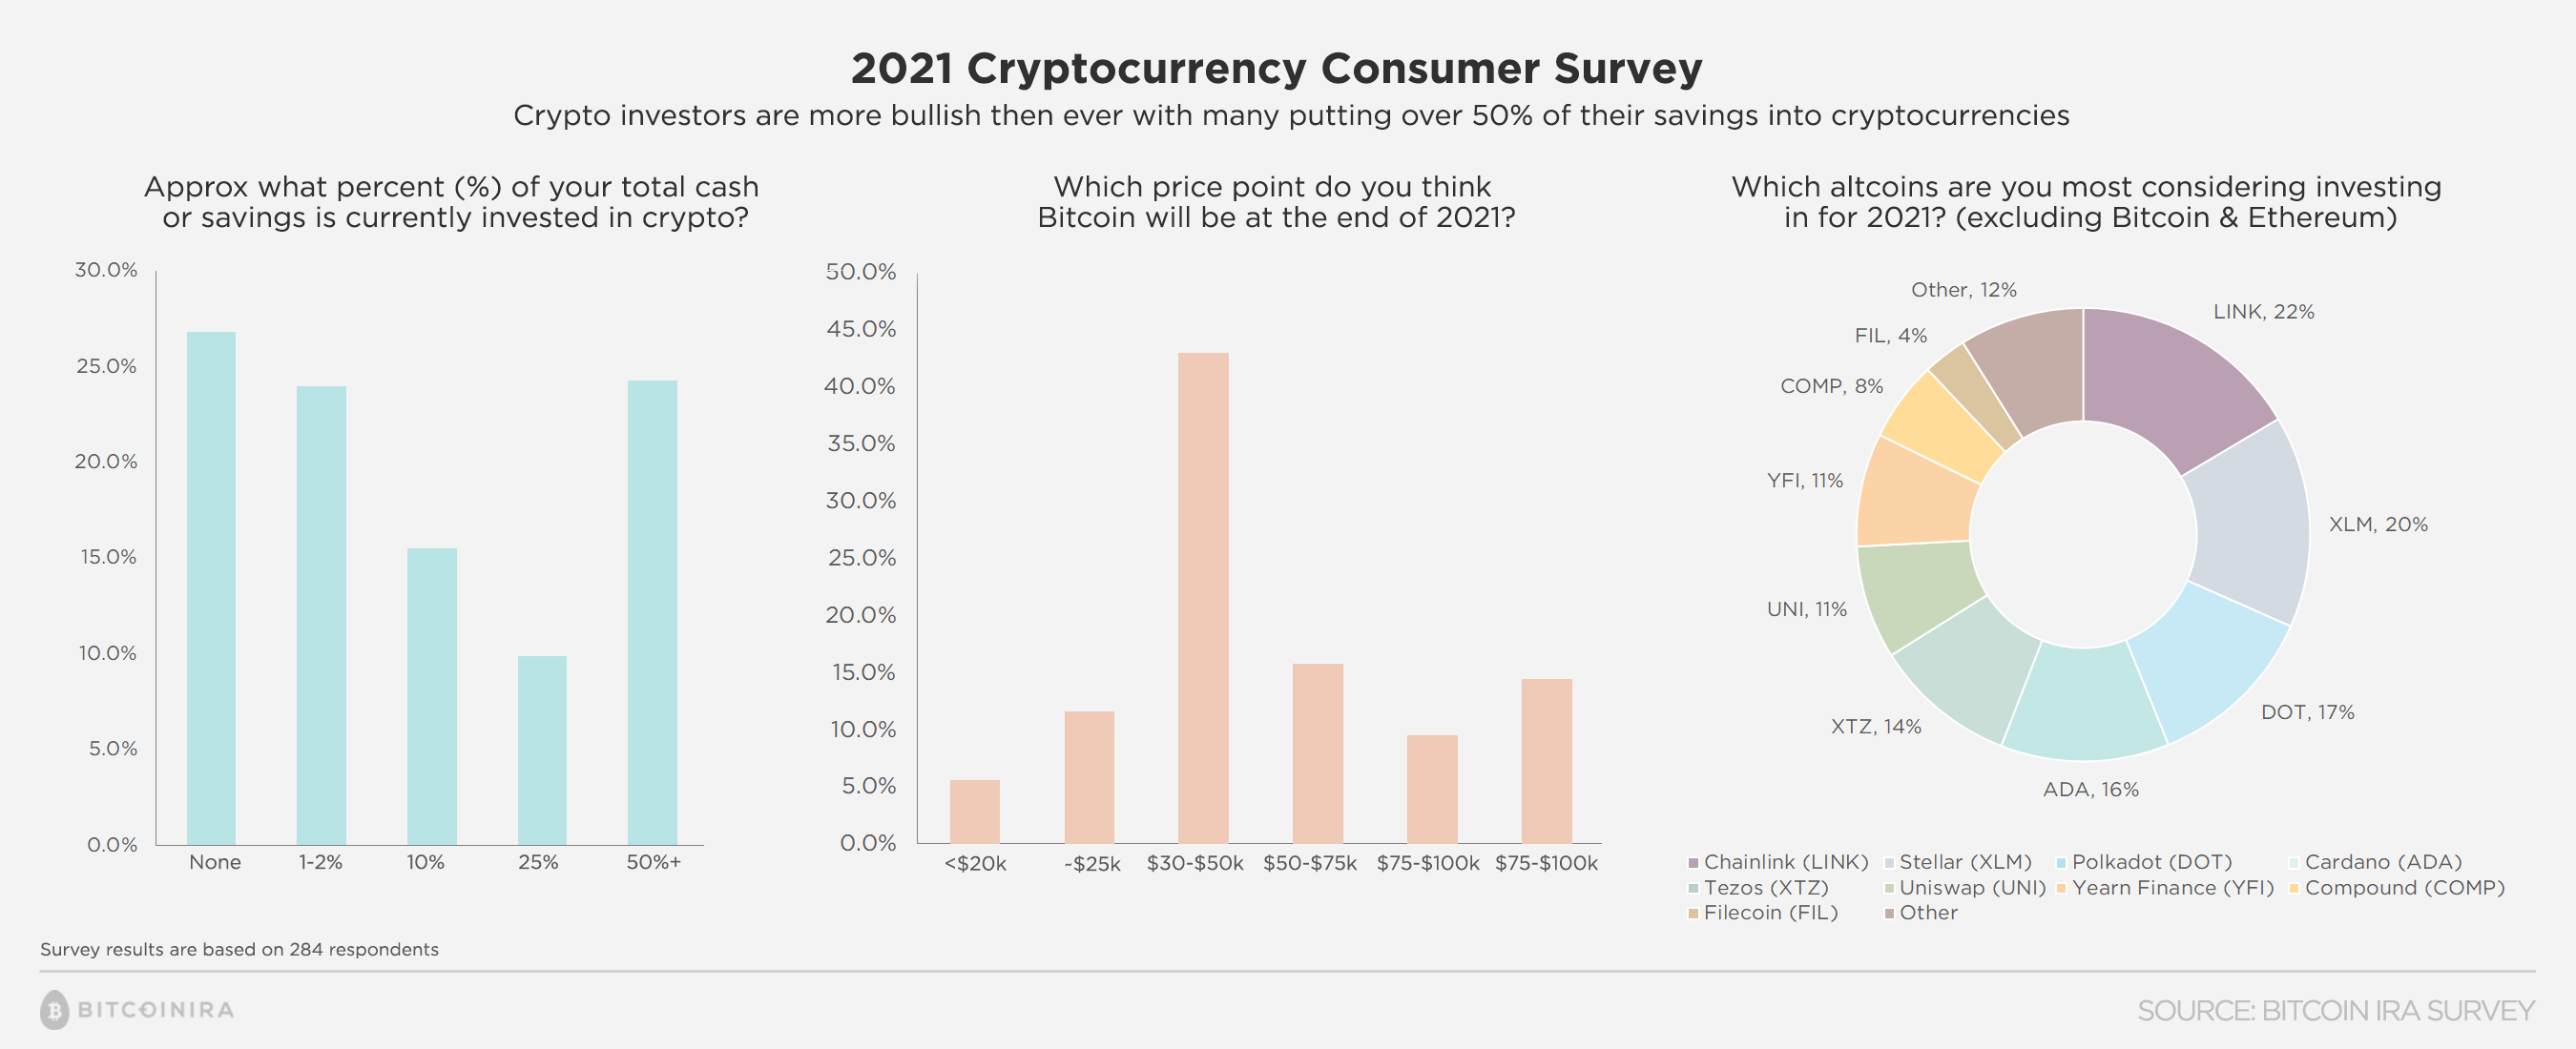 Image shows a crypto currency consumer survey discussed in press release